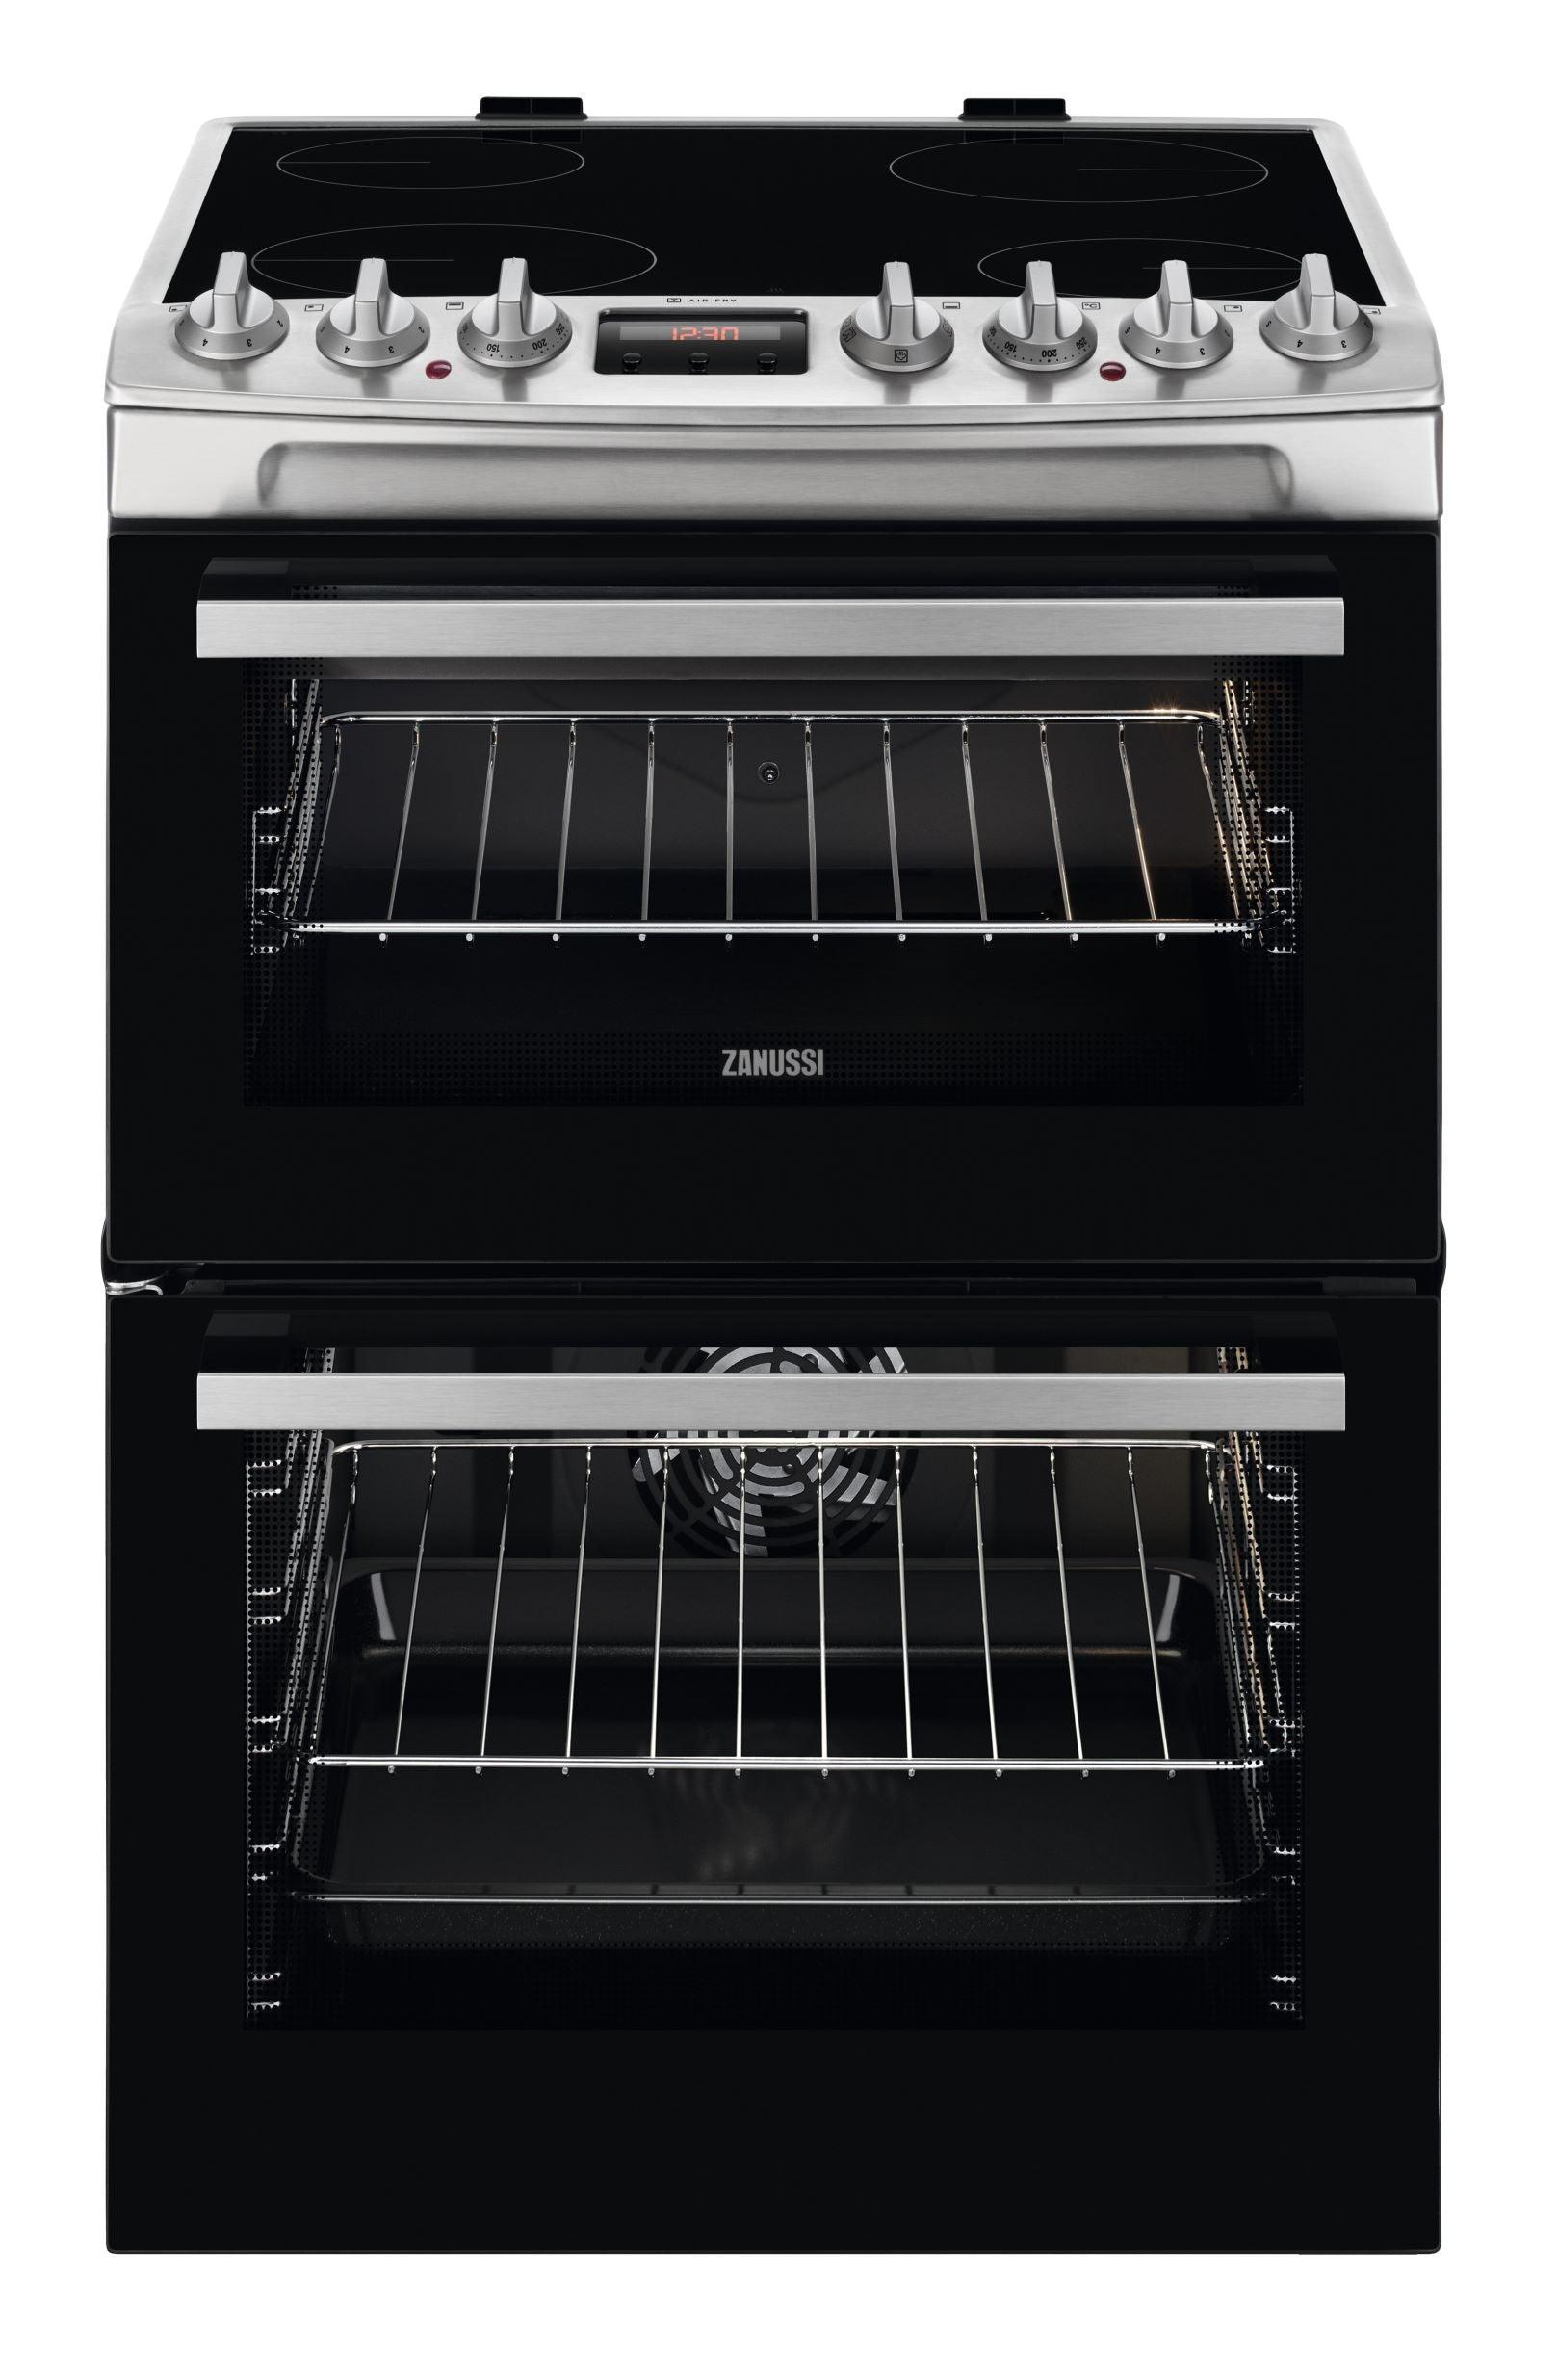 Zanussi Airfry 60cm Stainless Steel Electric Cooker with Ceramic Hob  ZCV69360XA - Peter Murphy Lighting & Electrical Ltd